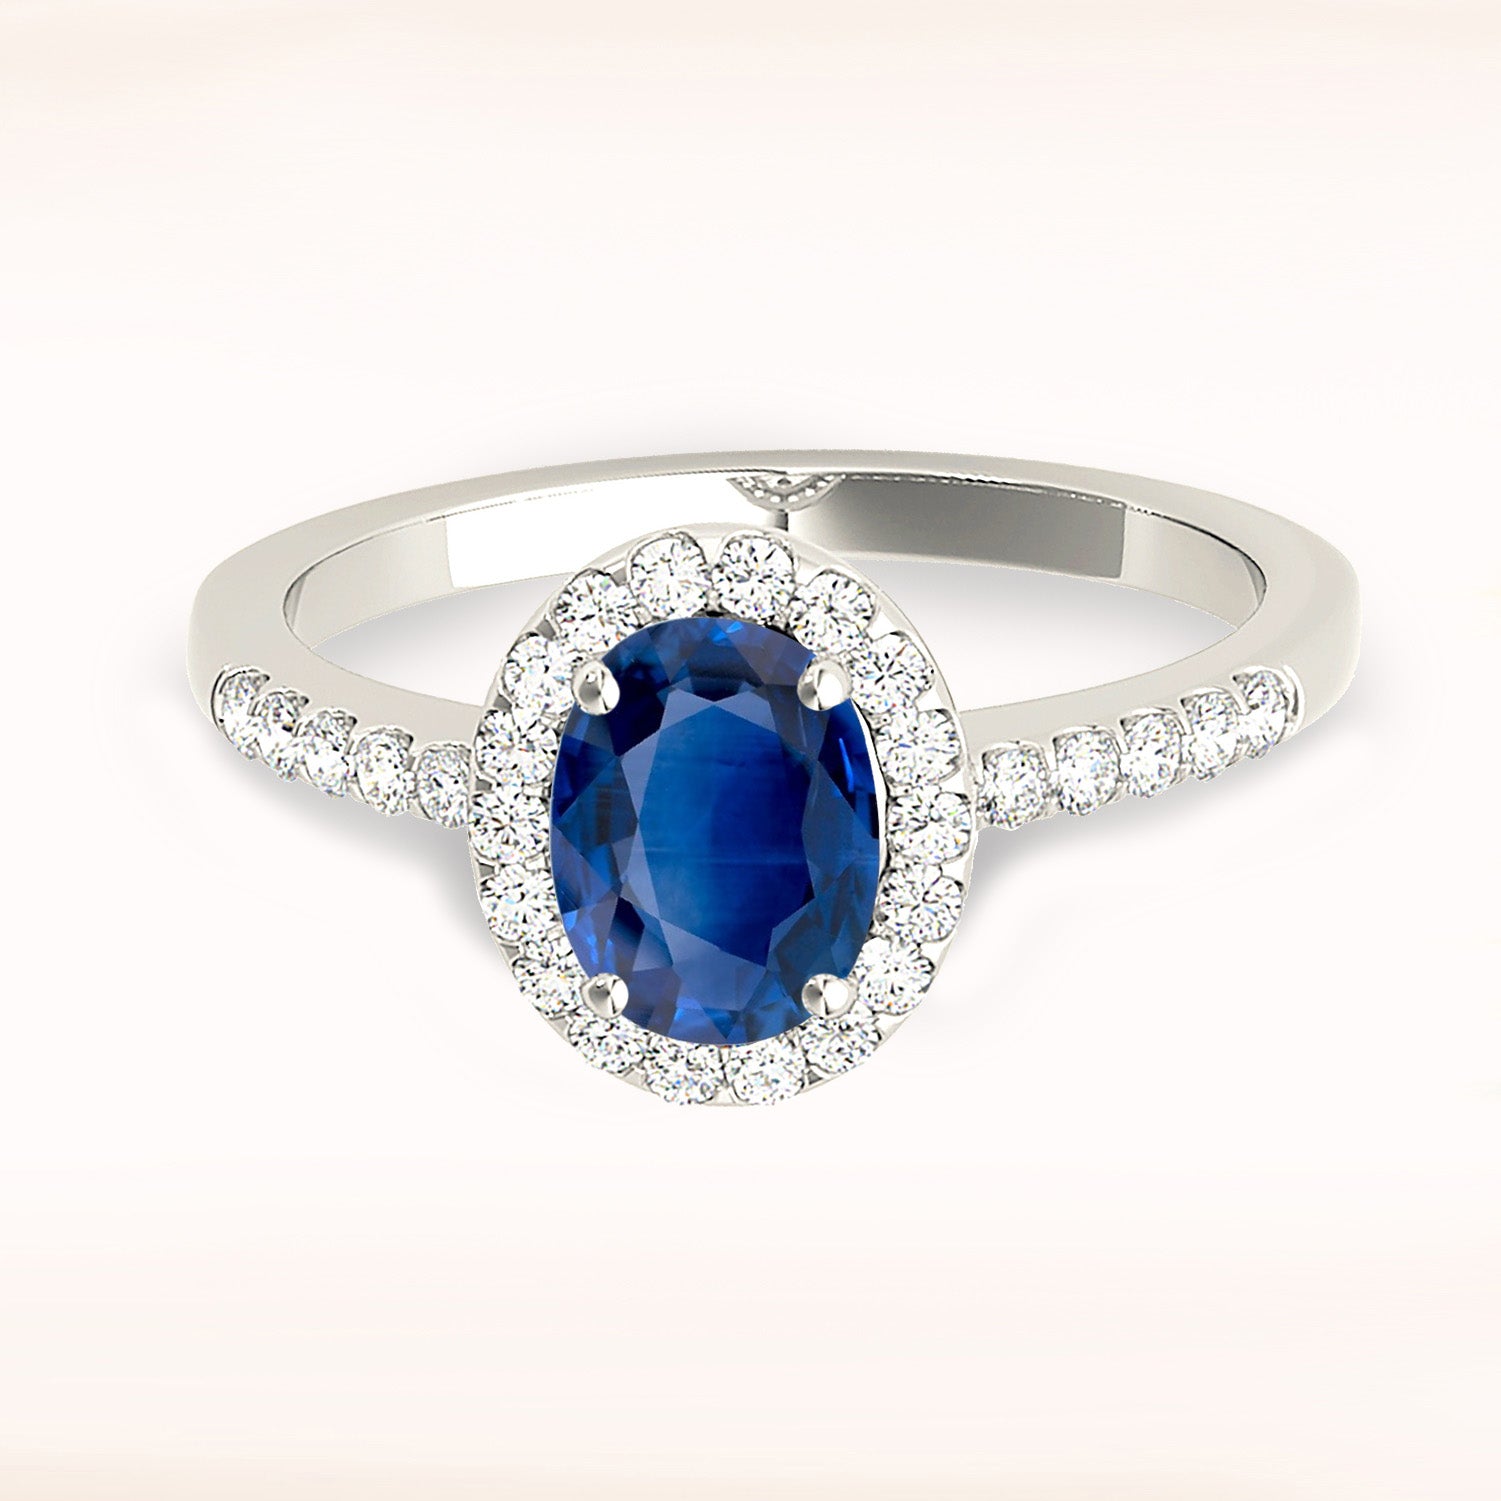 1.51 ct. Genuine Blue Oval Sapphire Ring With 0.25 ctw. Diamond Halo, Delicate Diamond Band, Filigree Basket | Sapphire And Diamond Ring-in 14K/18K White, Yellow, Rose Gold and Platinum - Christmas Jewelry Gift -VIRABYANI